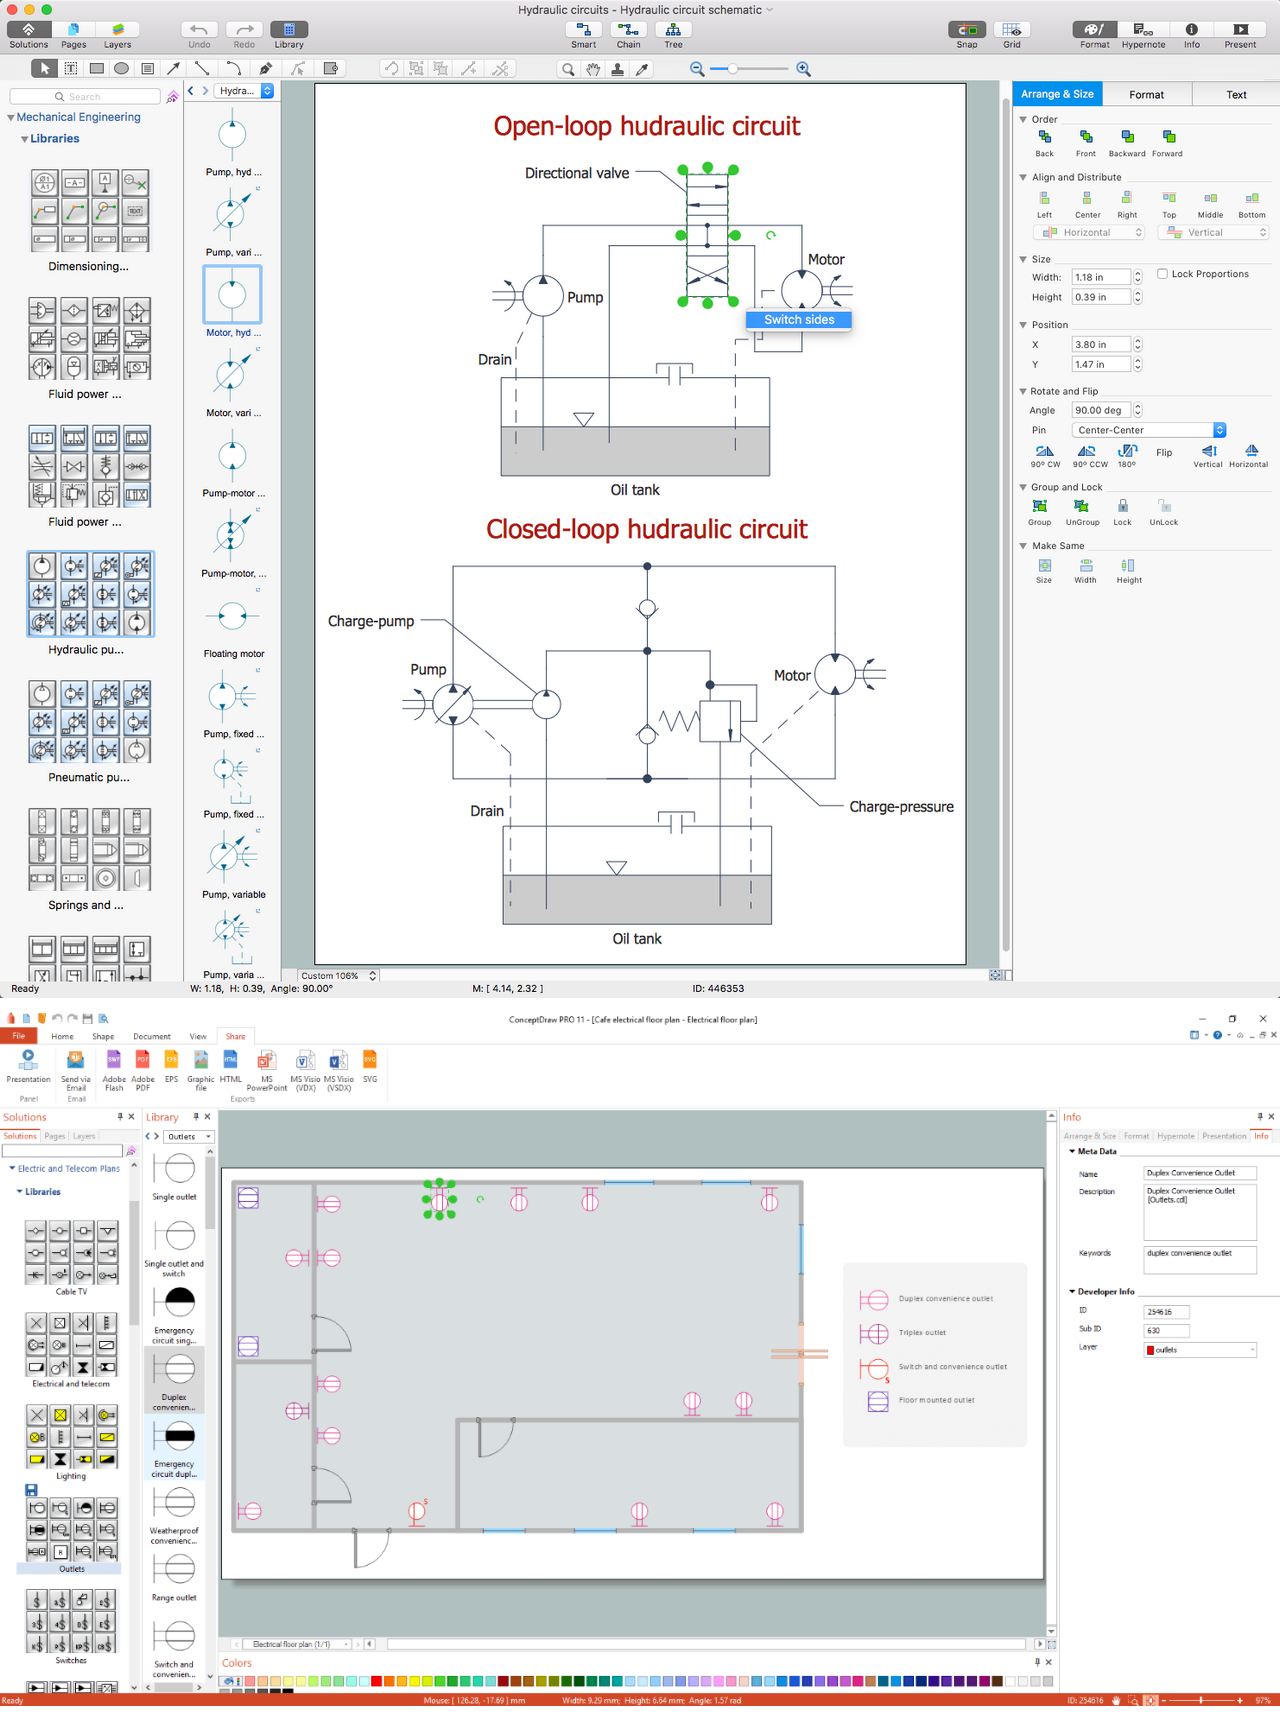 ConceptDraw DIAGRAM software for making mechanic and electrical diagrams for architectural design